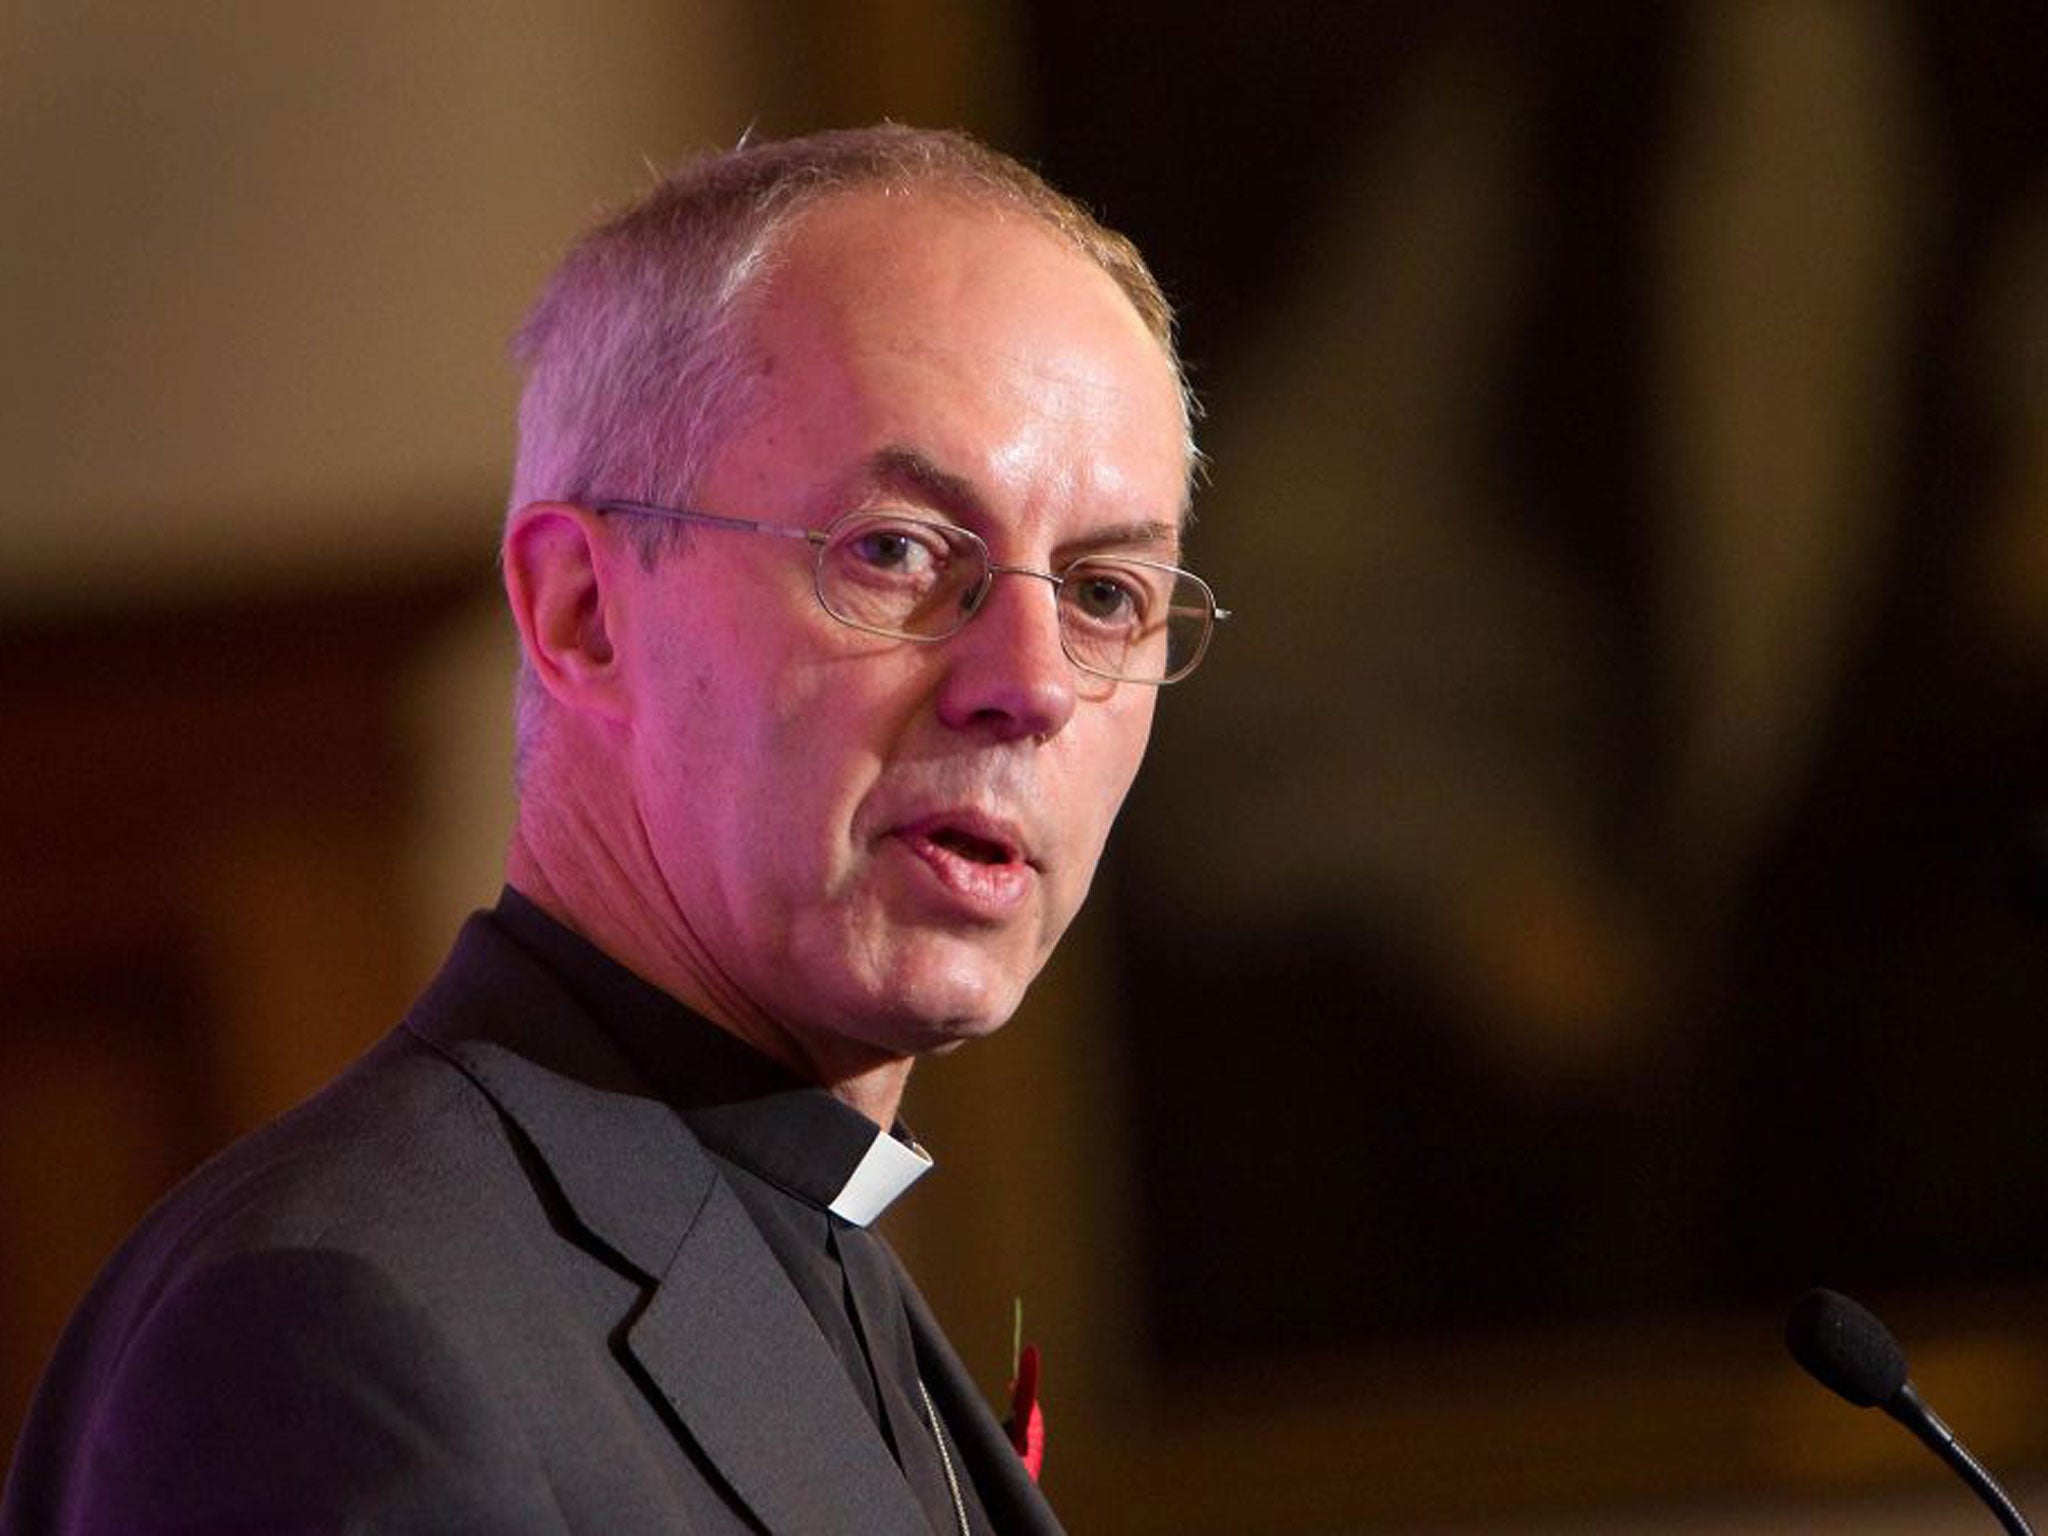 Britain has had 'quite a long time' below the economic activity levels of 2007, the Archbishop of Canterbury said